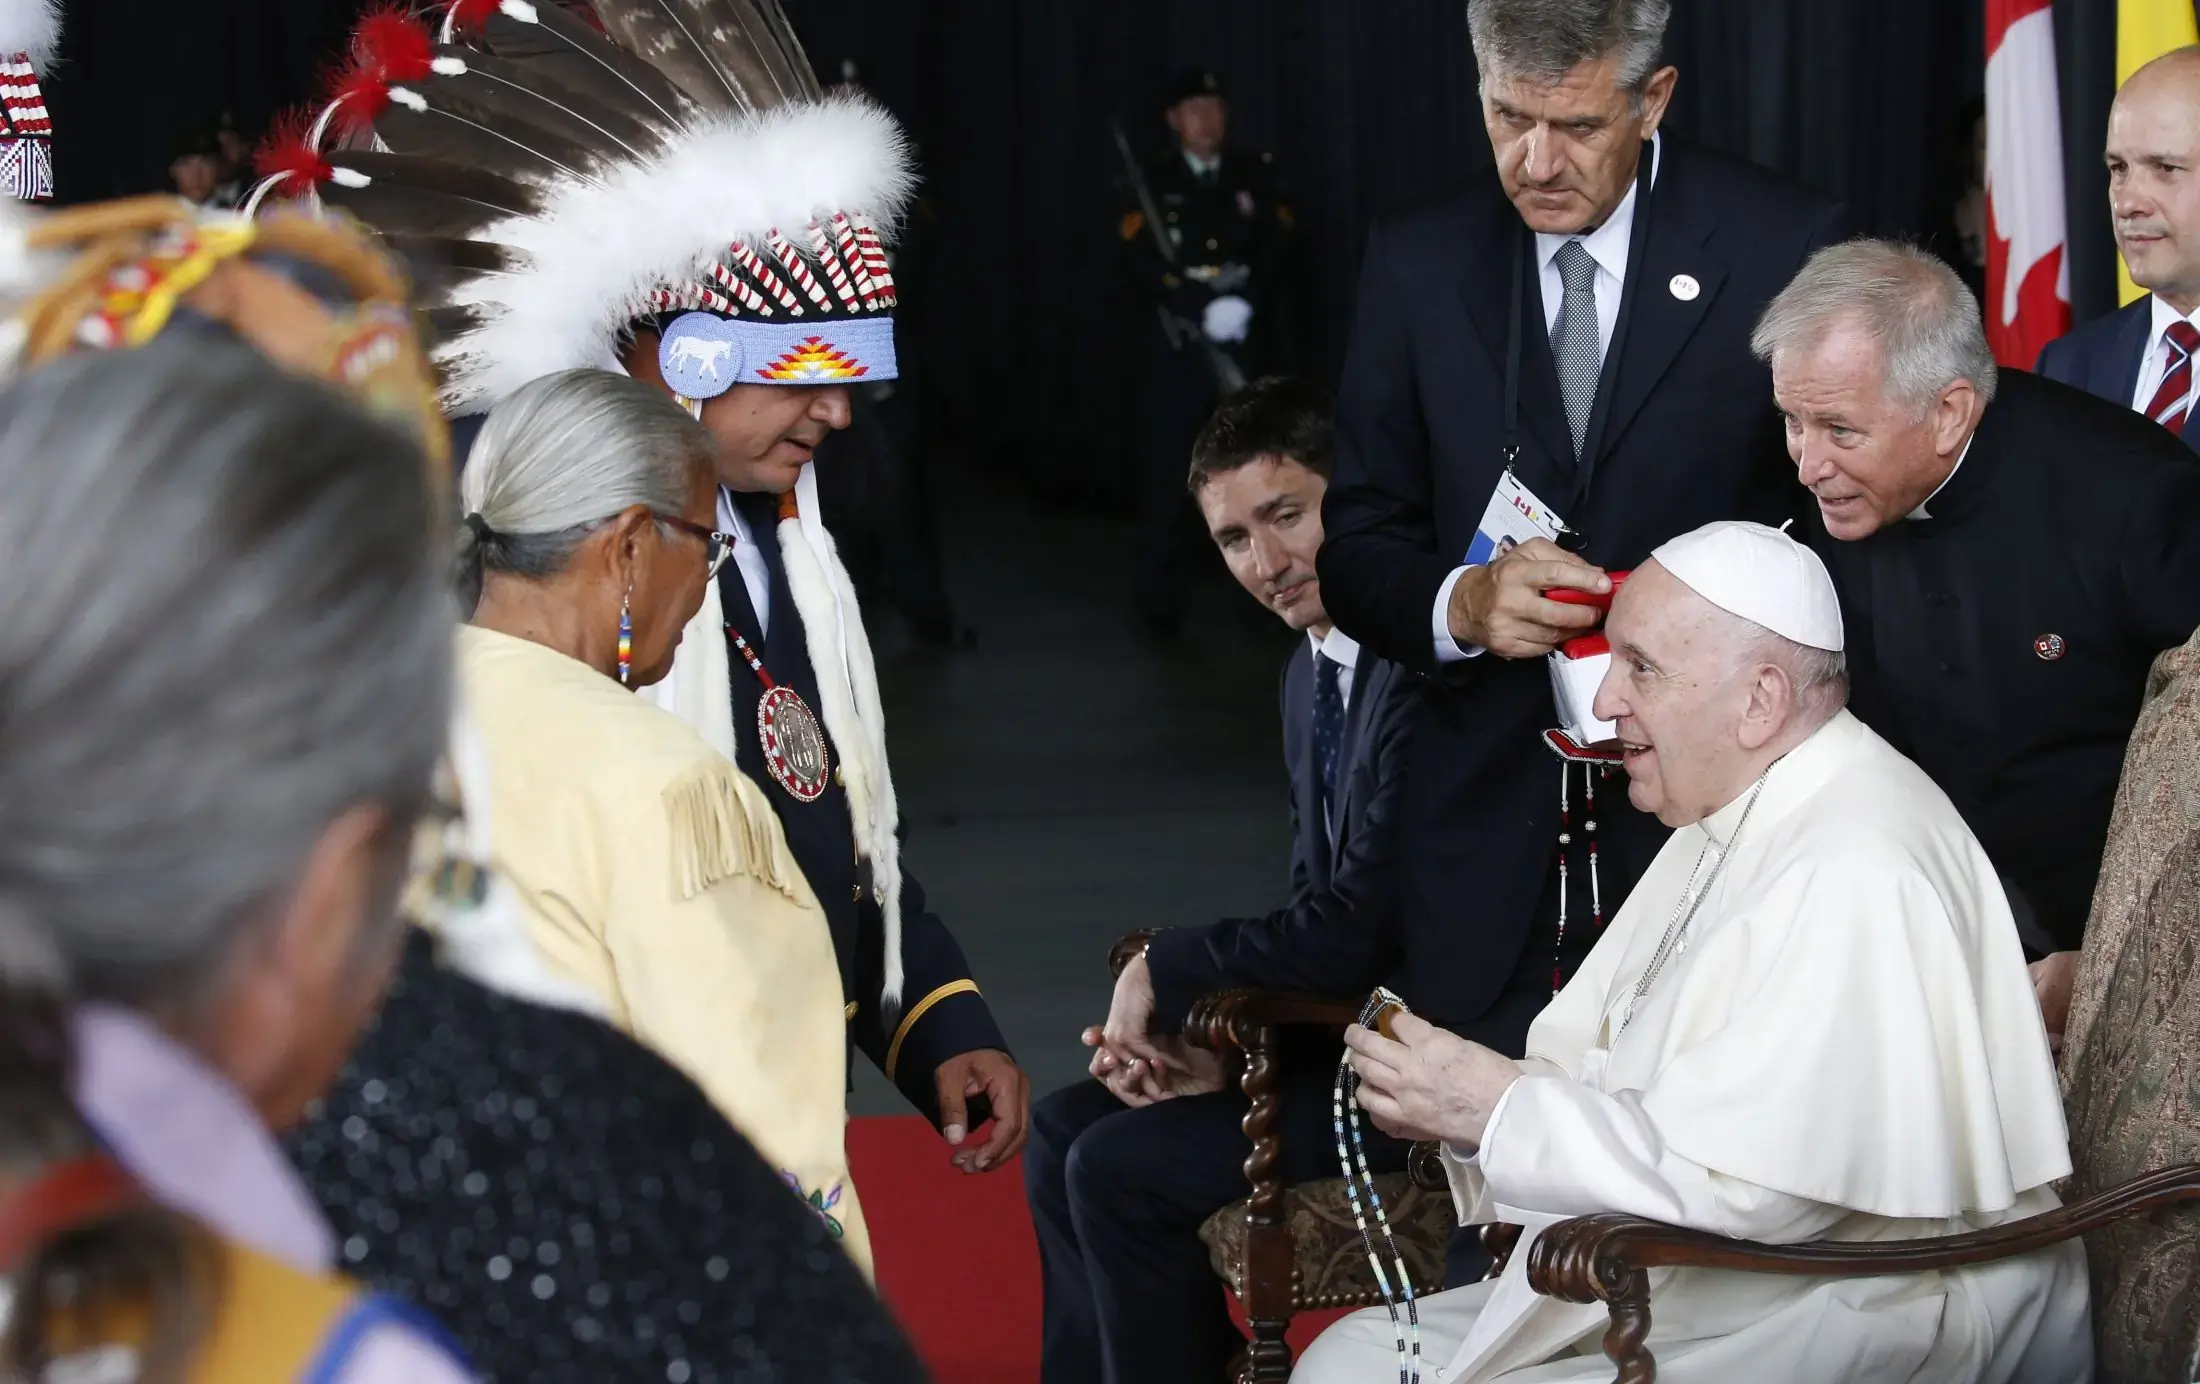 Pope Francis is welcomed by Indigenous leaders, Justin Trudeau, Canada's prime minister, looking on at center, and Mary Simon, governor general, (not pictured) during a welcoming ceremony at Edmonton International Airport. The pope was beginning a six-day visit to Canada